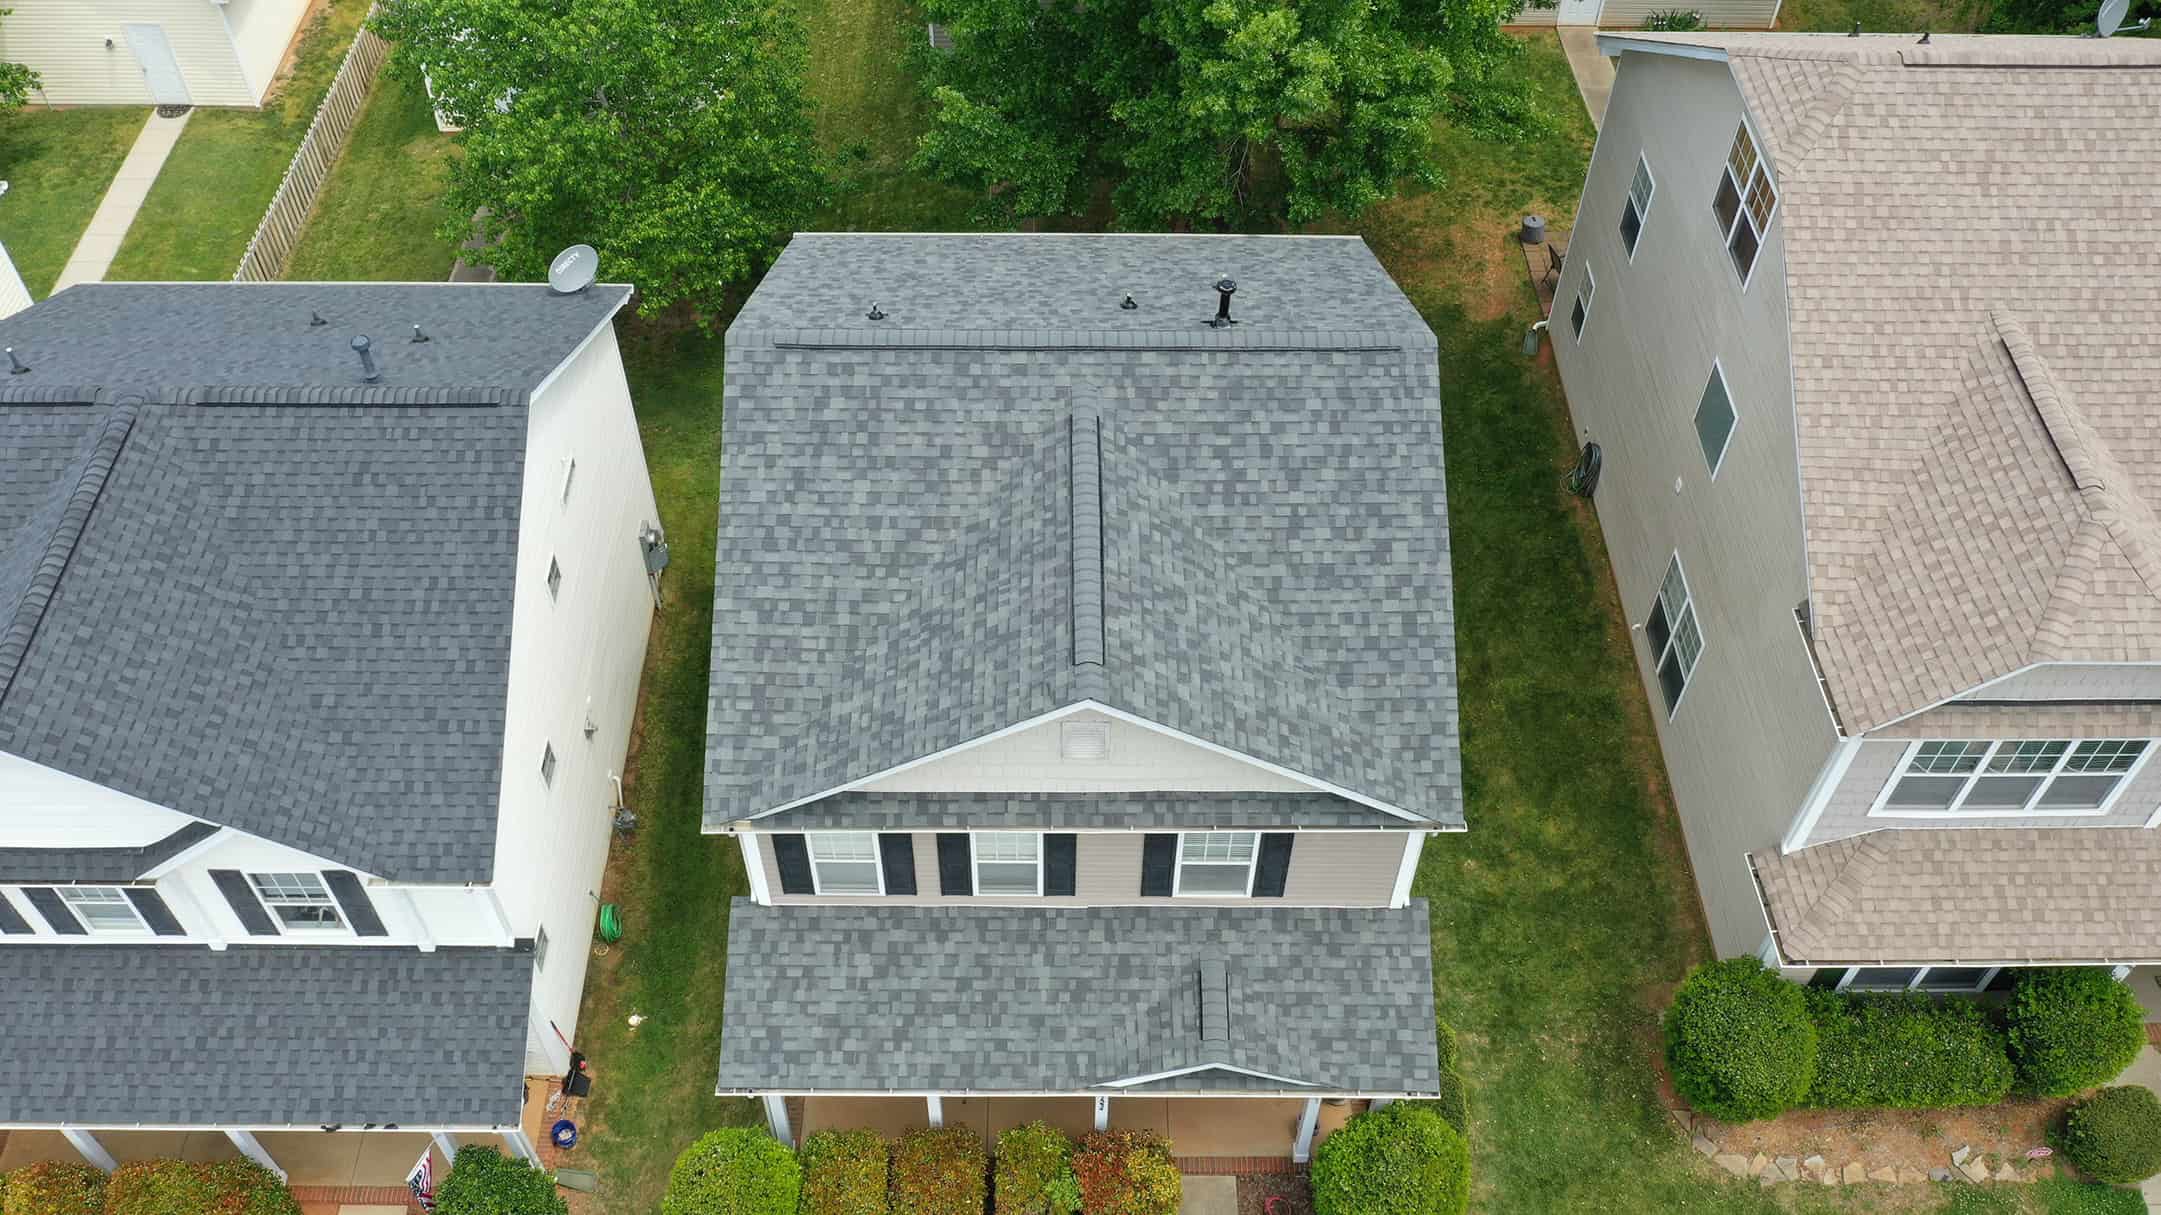 http://top%20aerial%20view%20of%20residential%20home%20with%20oakridge%20trudef%20estate%20gray%20shingles%20and%20green%20grass